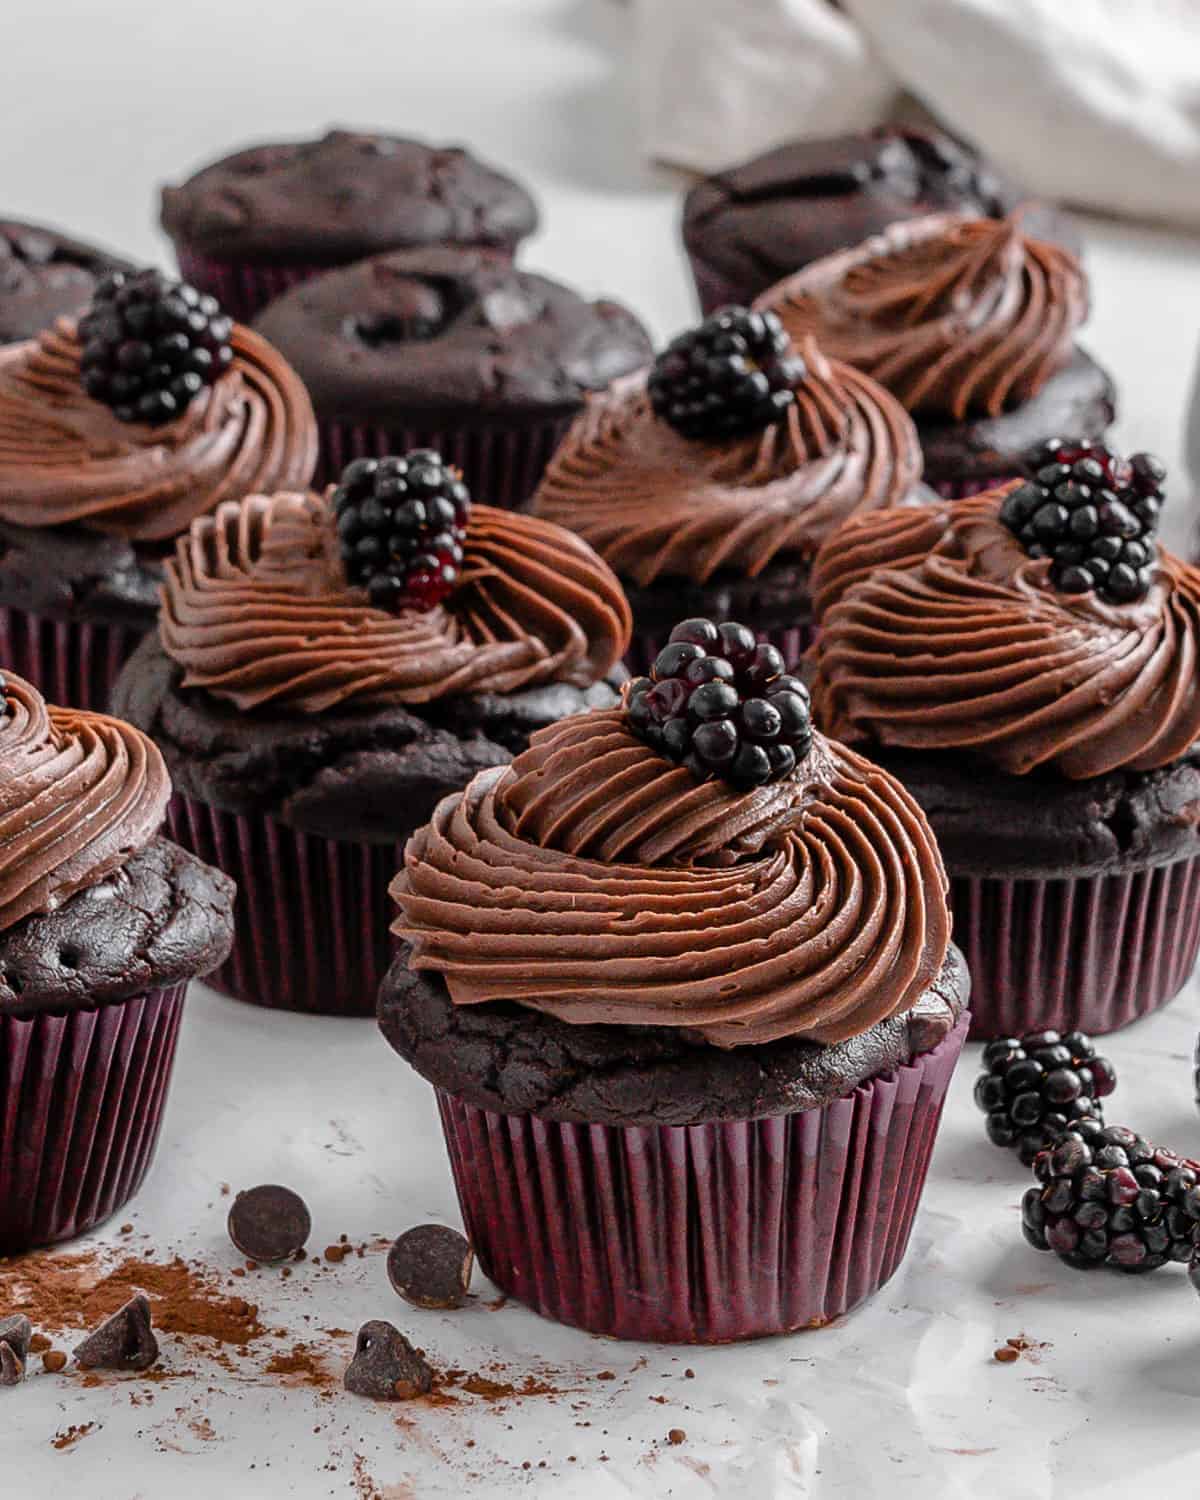 completed Blackberry Chocolate Cupcakes with blackberries scattered against a white surface